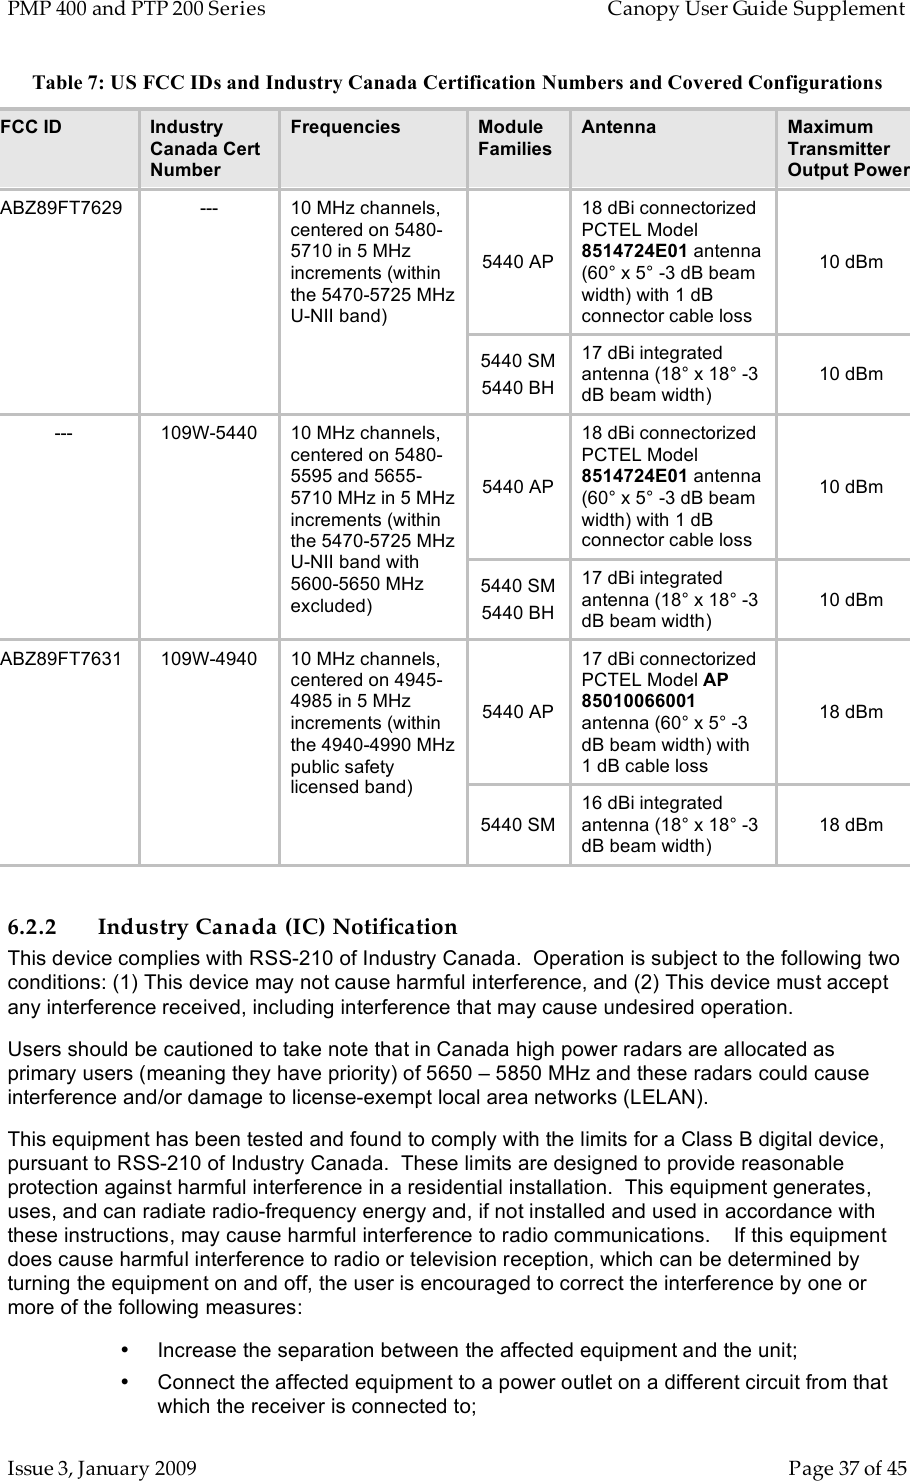 PMP 400 and PTP 200 Series   Canopy User Guide Supplement Issue 3, January 2009    Page 37 of 45 Table 7: US FCC IDs and Industry Canada Certification Numbers and Covered Configurations FCC ID Industry Canada Cert Number Frequencies Module Families Antenna Maximum Transmitter Output Power 5440 AP 18 dBi connectorized PCTEL Model 8514724E01 antenna (60° x 5° -3 dB beam width) with 1 dB connector cable loss 10 dBm ABZ89FT7629 --- 10 MHz channels, centered on 5480-5710 in 5 MHz increments (within the 5470-5725 MHz U-NII band) 5440 SM 5440 BH 17 dBi integrated antenna (18° x 18° -3 dB beam width) 10 dBm 5440 AP 18 dBi connectorized PCTEL Model 8514724E01 antenna (60° x 5° -3 dB beam width) with 1 dB connector cable loss 10 dBm --- 109W-5440 10 MHz channels, centered on 5480-5595 and 5655-5710 MHz in 5 MHz increments (within the 5470-5725 MHz U-NII band with 5600-5650 MHz excluded) 5440 SM 5440 BH 17 dBi integrated antenna (18° x 18° -3 dB beam width) 10 dBm 5440 AP 17 dBi connectorized PCTEL Model AP 85010066001 antenna (60° x 5° -3 dB beam width) with 1 dB cable loss 18 dBm ABZ89FT7631 109W-4940 10 MHz channels, centered on 4945-4985 in 5 MHz increments (within the 4940-4990 MHz public safety licensed band) 5440 SM 16 dBi integrated antenna (18° x 18° -3 dB beam width) 18 dBm  6.2.2 Industry Canada (IC) Notification  This device complies with RSS-210 of Industry Canada.  Operation is subject to the following two conditions: (1) This device may not cause harmful interference, and (2) This device must accept any interference received, including interference that may cause undesired operation. Users should be cautioned to take note that in Canada high power radars are allocated as primary users (meaning they have priority) of 5650 – 5850 MHz and these radars could cause interference and/or damage to license-exempt local area networks (LELAN). This equipment has been tested and found to comply with the limits for a Class B digital device, pursuant to RSS-210 of Industry Canada.  These limits are designed to provide reasonable protection against harmful interference in a residential installation.  This equipment generates, uses, and can radiate radio-frequency energy and, if not installed and used in accordance with these instructions, may cause harmful interference to radio communications.    If this equipment does cause harmful interference to radio or television reception, which can be determined by turning the equipment on and off, the user is encouraged to correct the interference by one or more of the following measures: •  Increase the separation between the affected equipment and the unit; •  Connect the affected equipment to a power outlet on a different circuit from that which the receiver is connected to; 